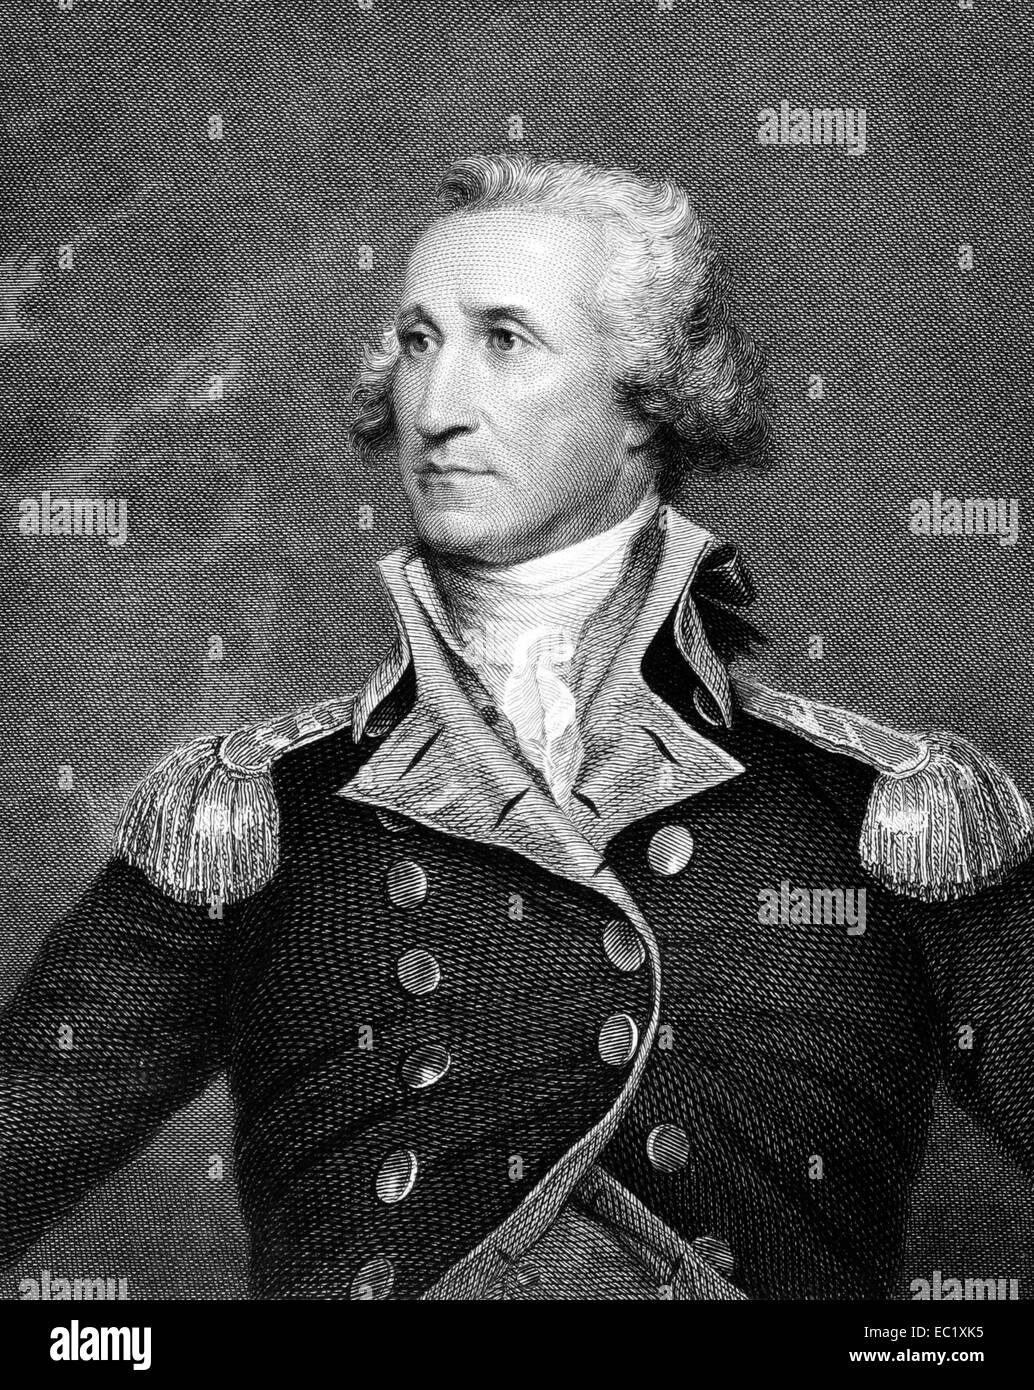 George Washington (1731-1799) on engraving from 1834. First President of the USA during 1789-1797. Stock Photo